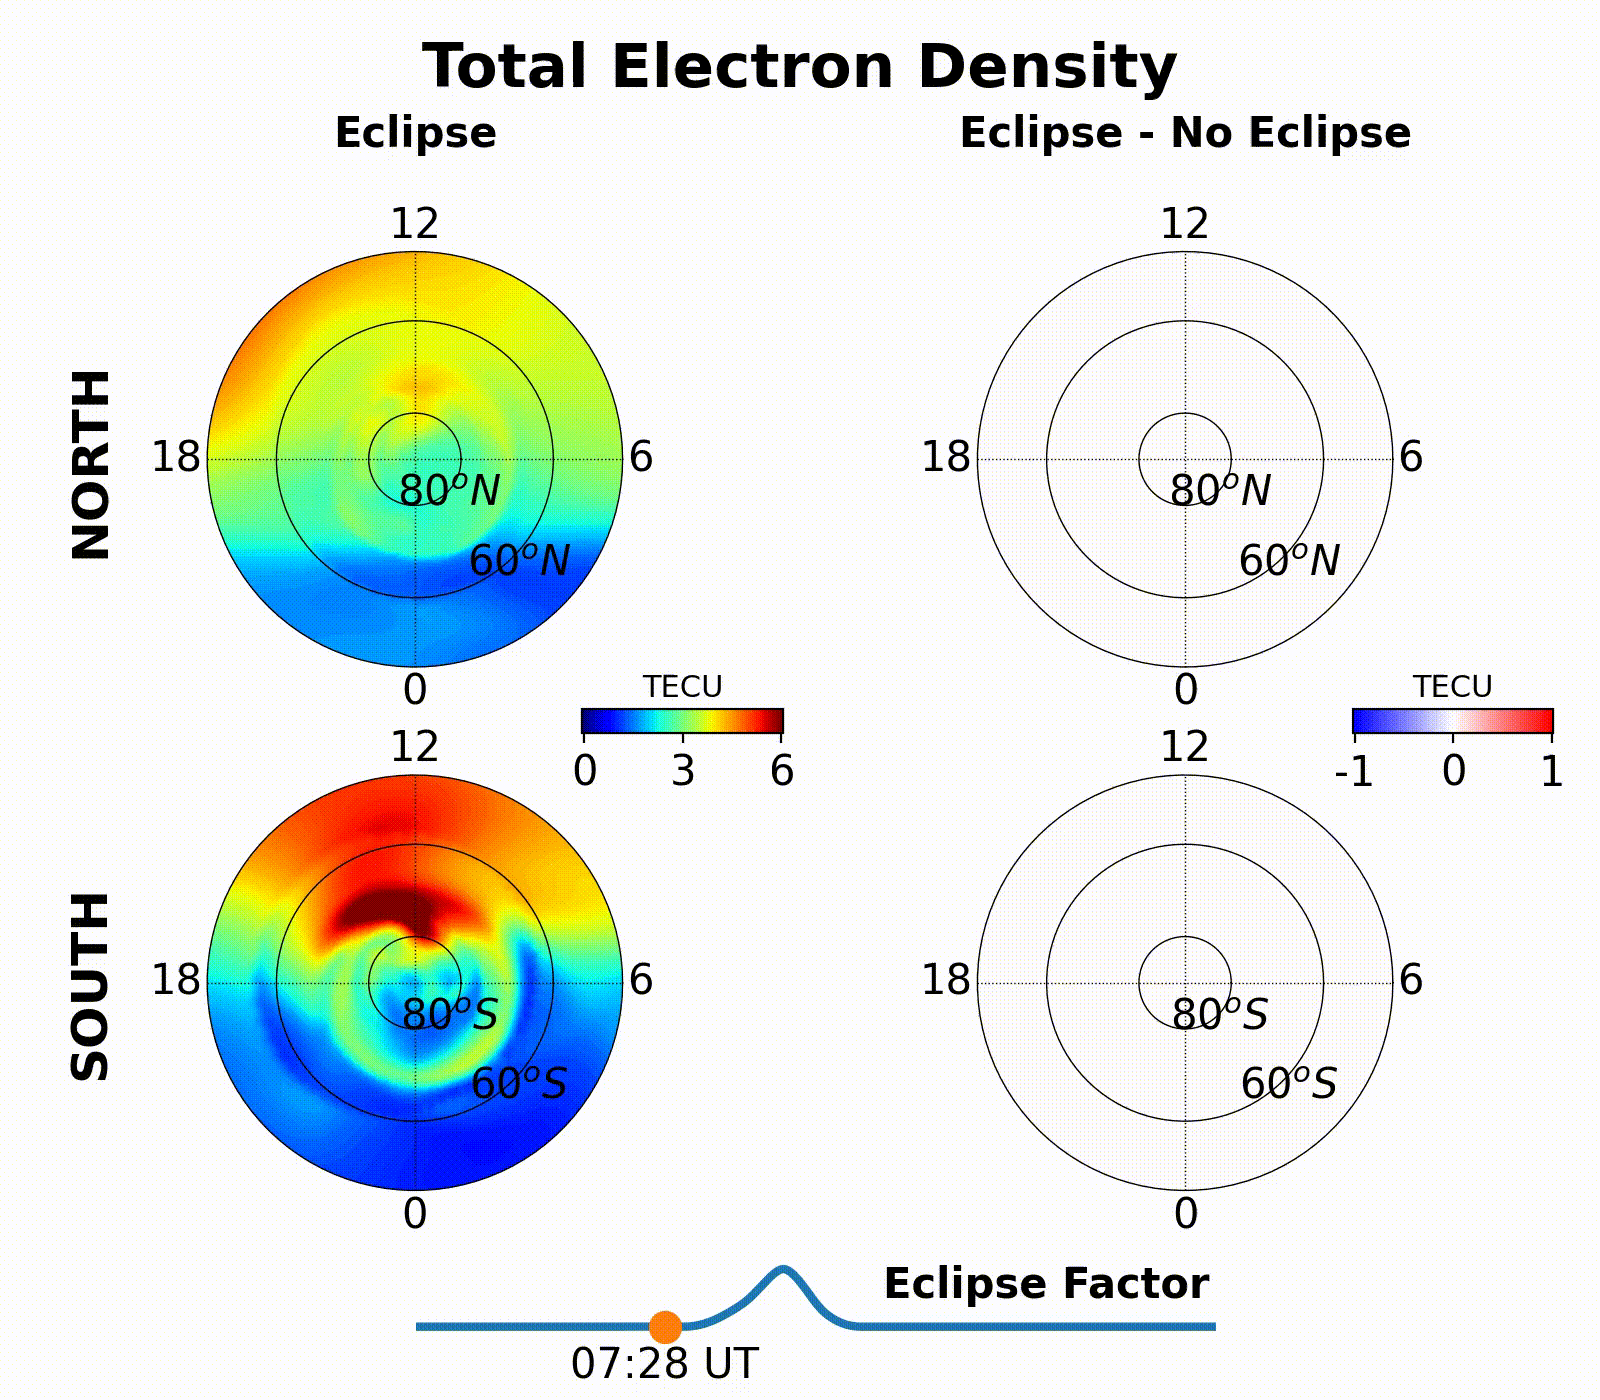 Animation of response of Earth’s atmosphere over the Northern hemisphere (top) and Southern hemisphere (bottom) to passage of solar eclipse over the Arctic. Location of total electron content in s atmosphere depicted in spectrum from blue (zero) to red (6 TECU). Changes specifically caused by 10 June 2021 eclipse shown on the right in spectrum from blue (-1) to white (0) to red (1). Time from 7:28 UTC to 14:00 UTC on 10 June 2021. Line at bottom of figure shows progress of eclipse.